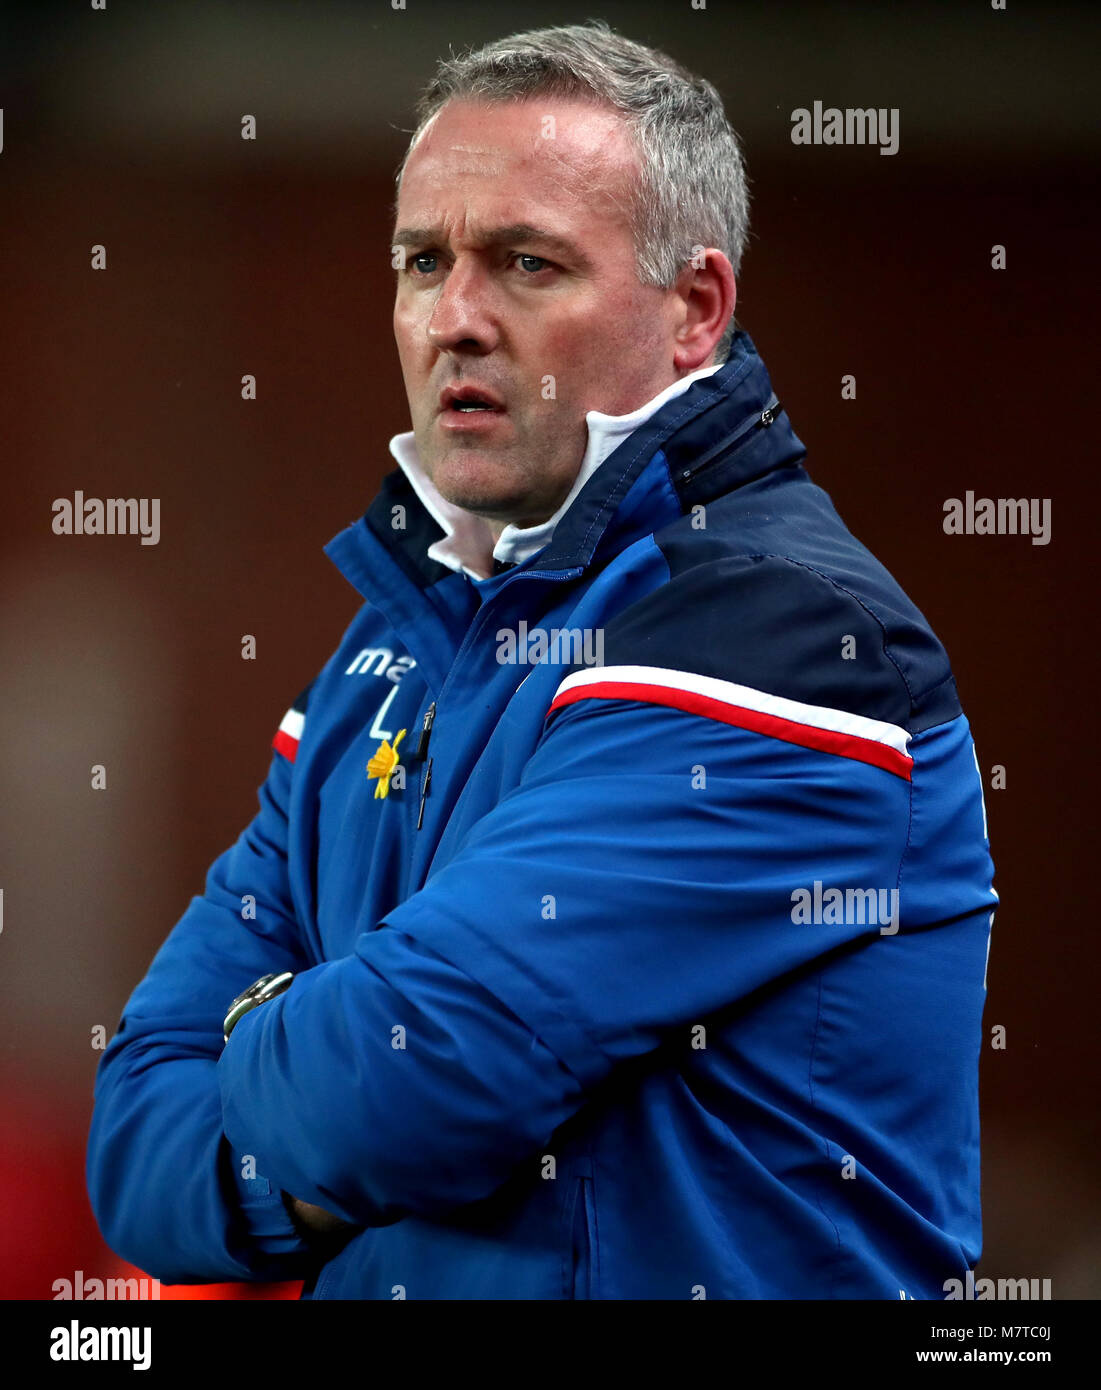 Stoke City manager Paul Lambert during the Premier League match at the bet365 Stadium, Stoke. PRESS ASSOCIATION Photo. Picture date: Monday March 12, 2018. See PA story SOCCER Stoke. Photo credit should read: Nick Potts/PA Wire. RESTRICTIONS: No use with unauthorised audio, video, data, fixture lists, club/league logos or 'live' services. Online in-match use limited to 75 images, no video emulation. No use in betting, games or single club/league/player publications. Stock Photo